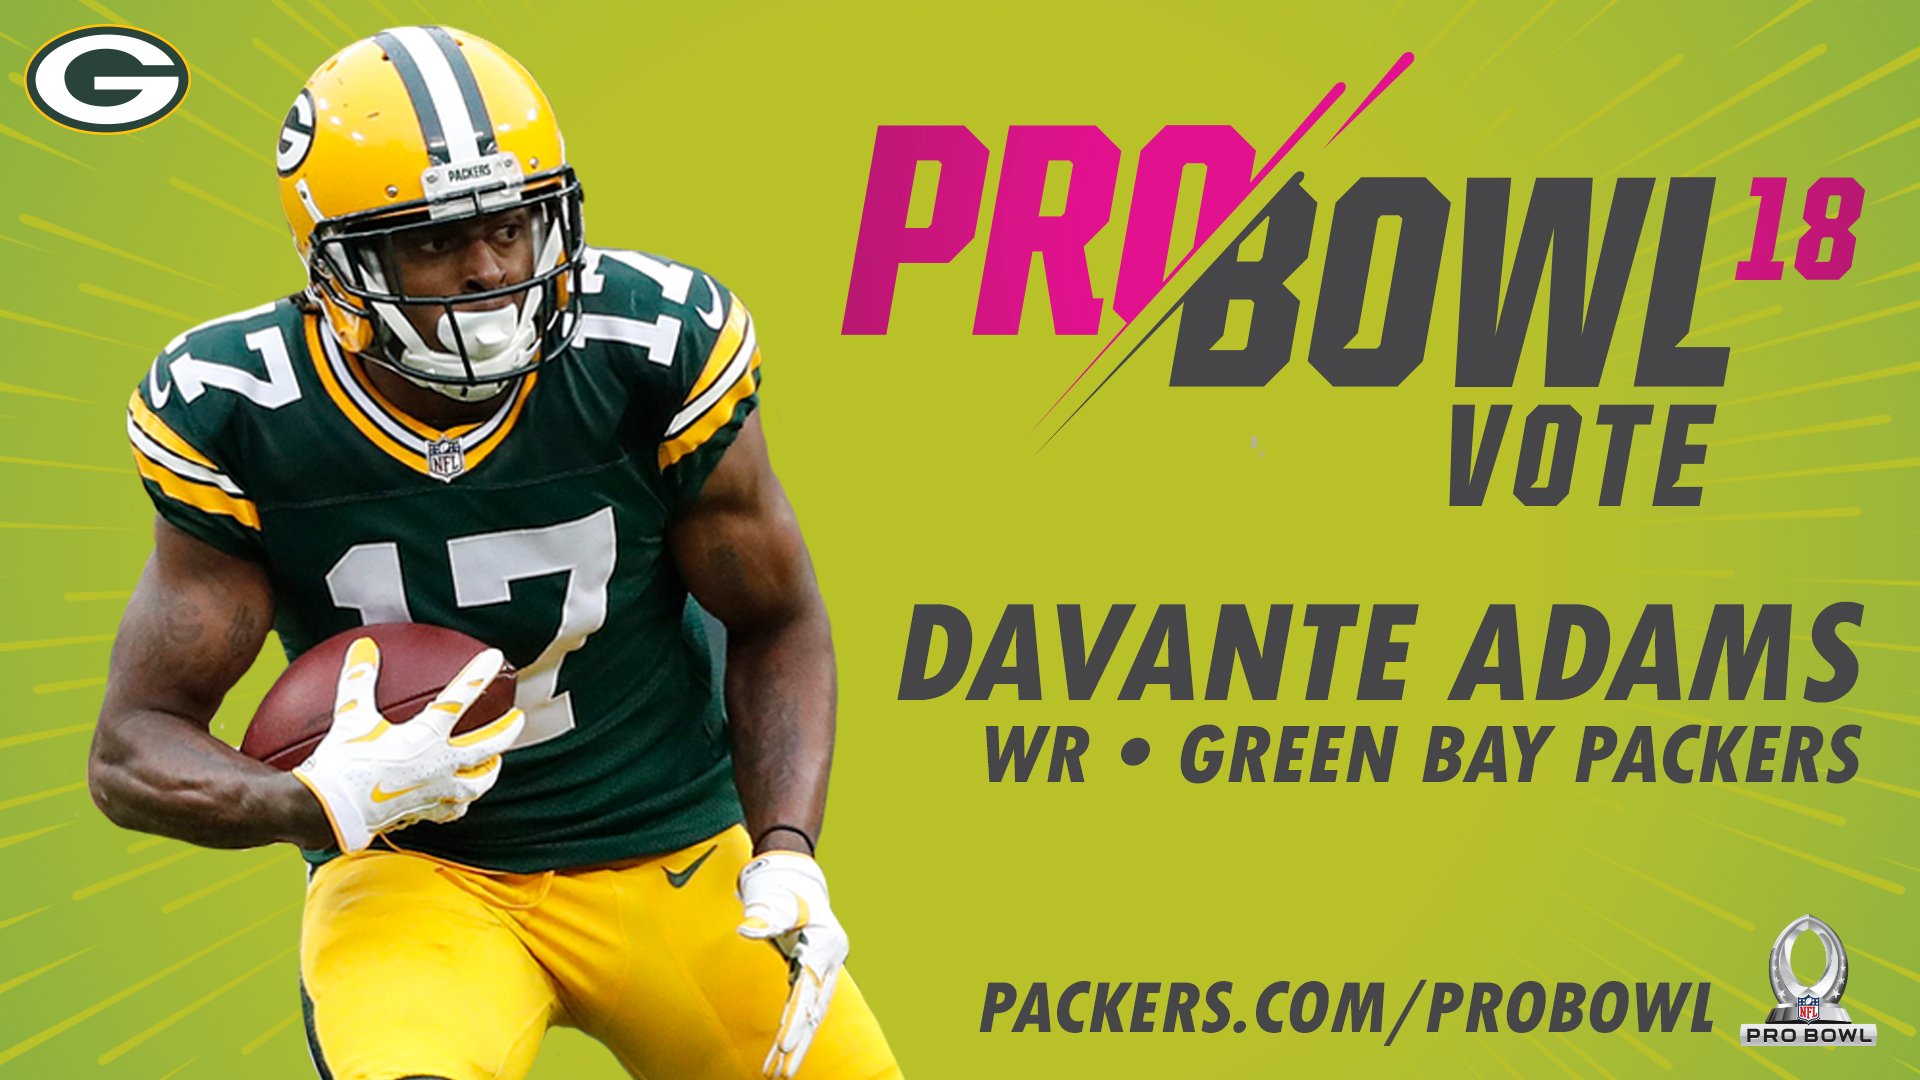 packers at pro bowl